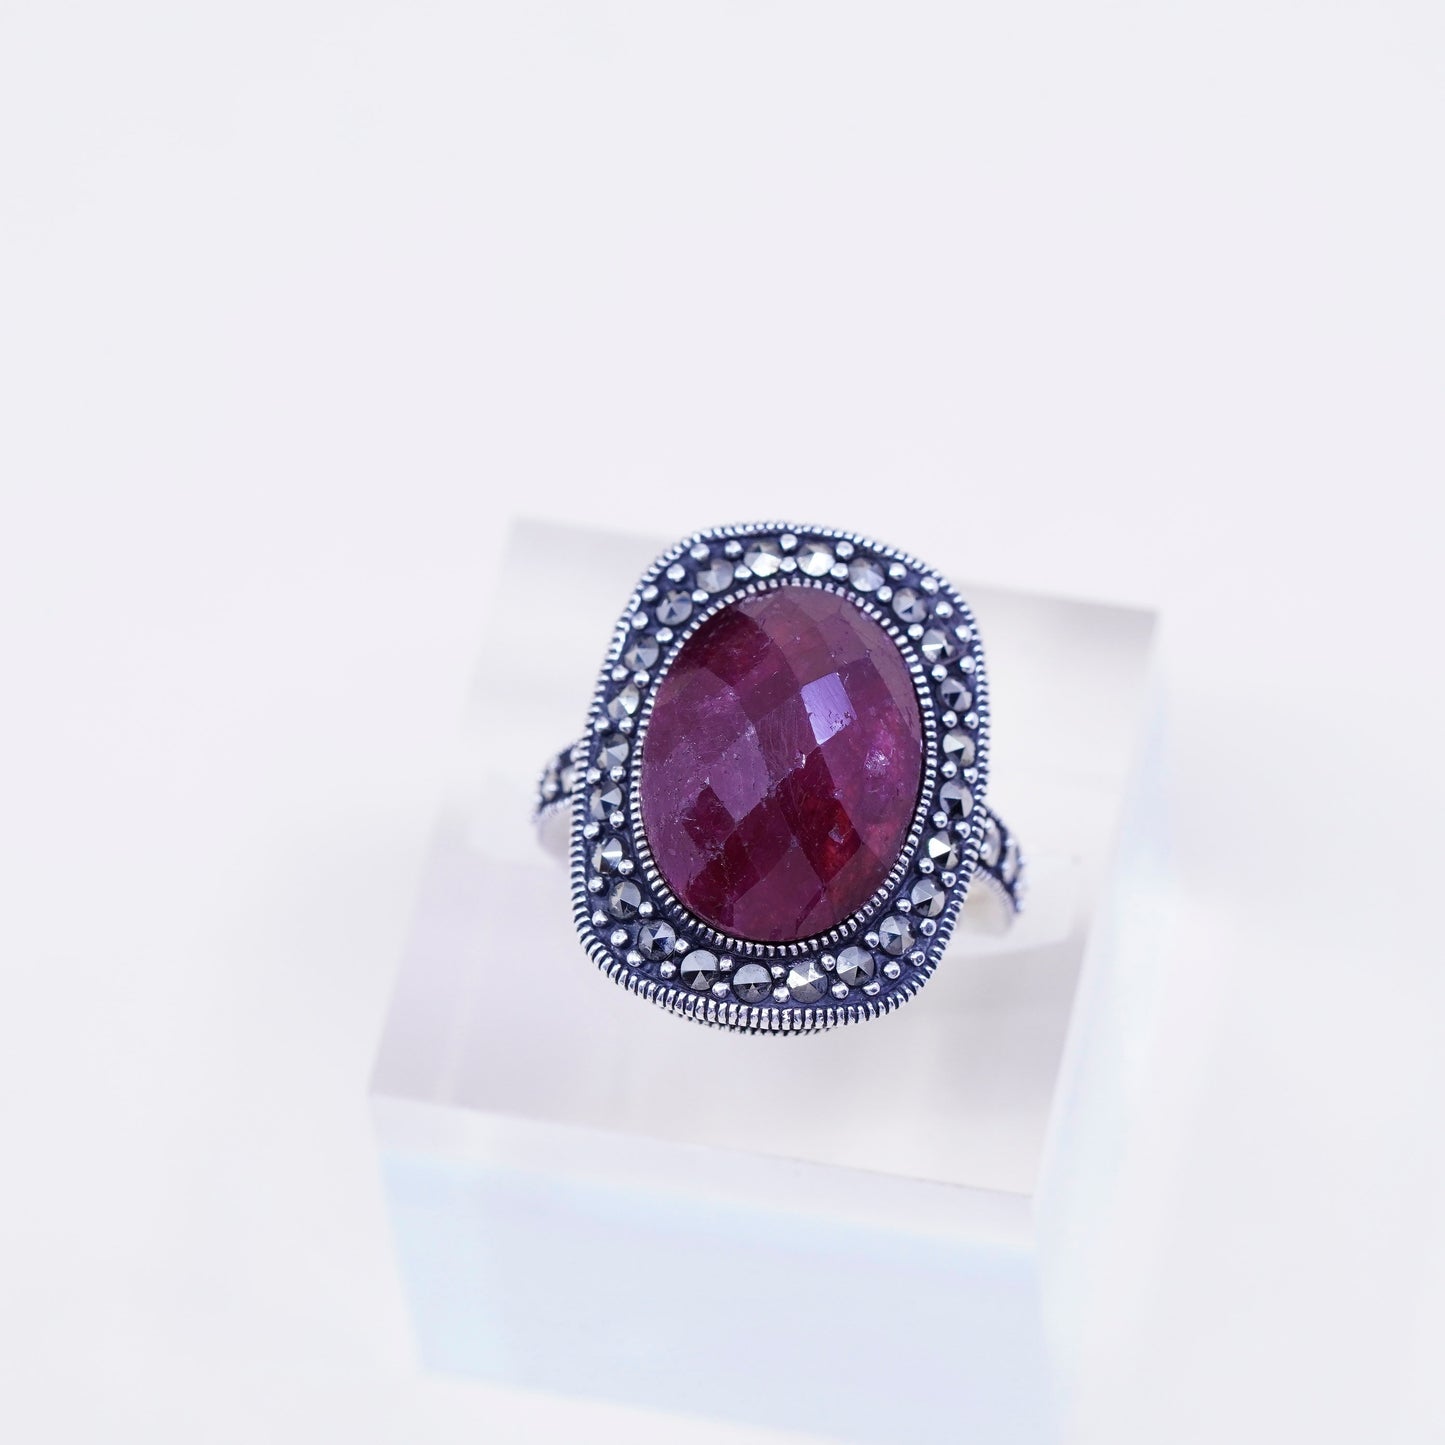 Size 6, Vintage sterling 925 silver handmade ring w/ Indian ruby and Marcasite